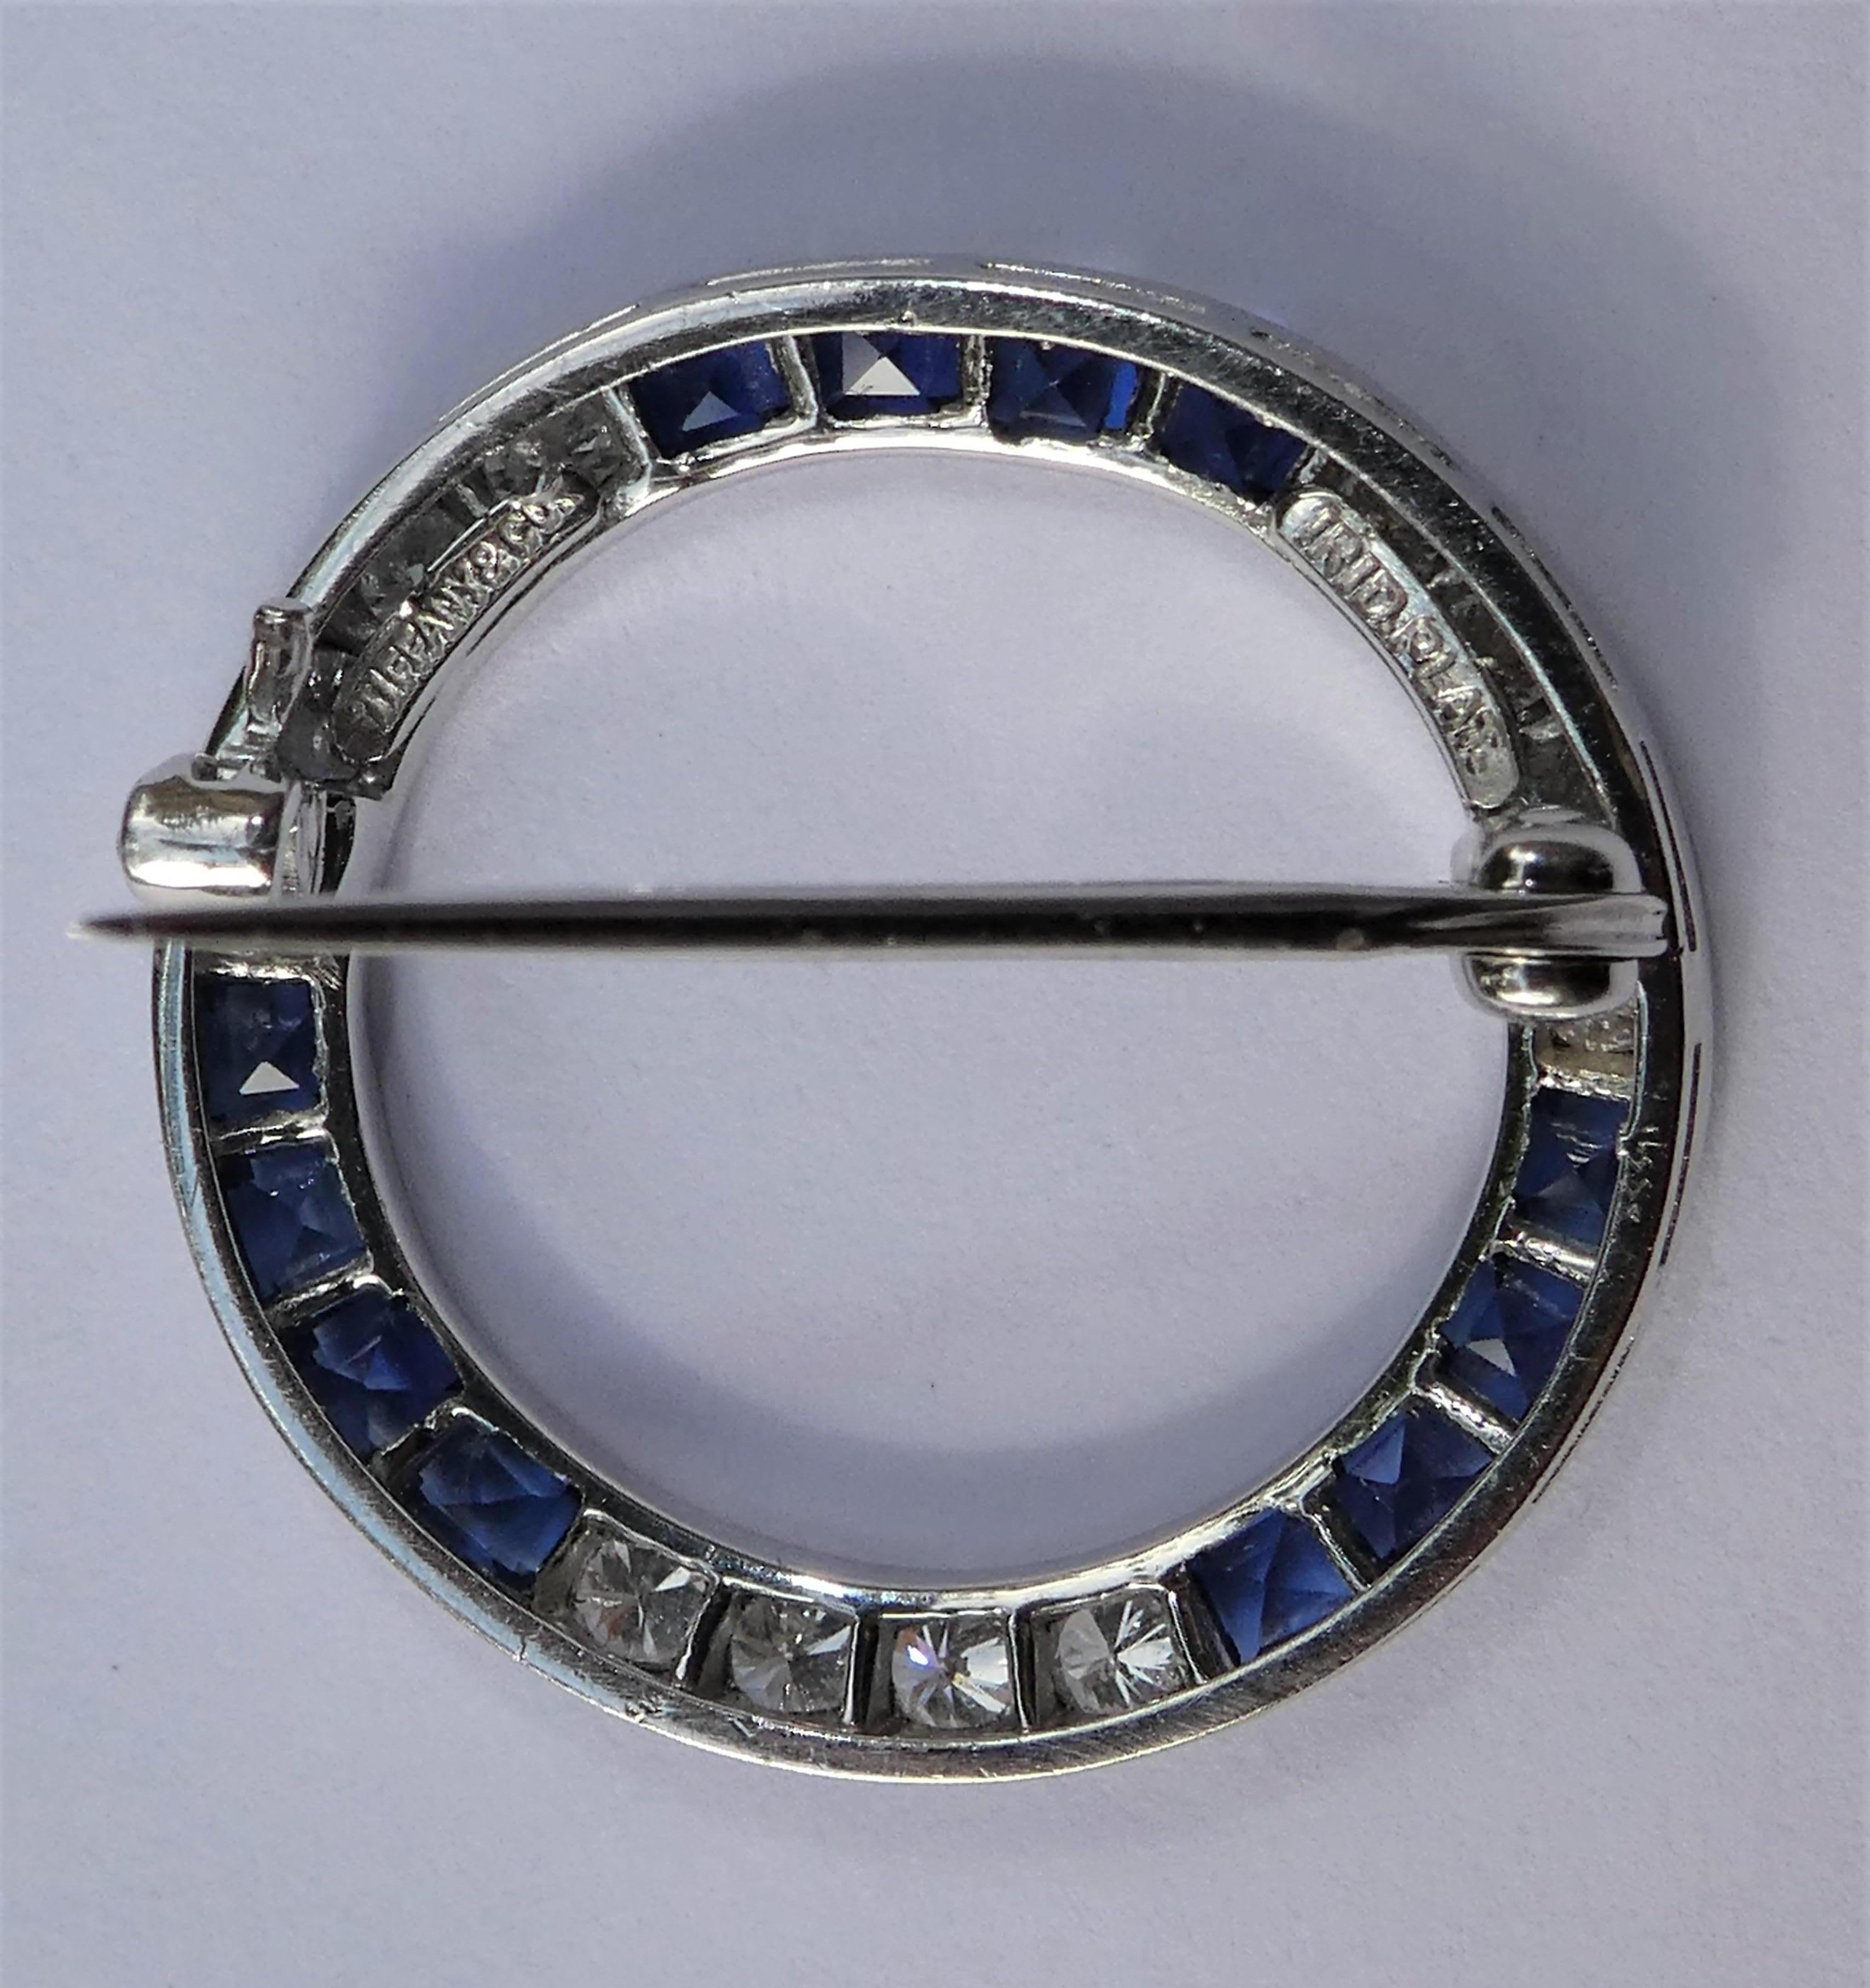 This circle brooch was crafted in the 1950s by Tiffany & Co. in N.Y. in platinum. One of the reasons that it looks fabulous on any spot is its classic geometic design, it looks e.g. lovely on a sweater or a dress. it comes in its original case and